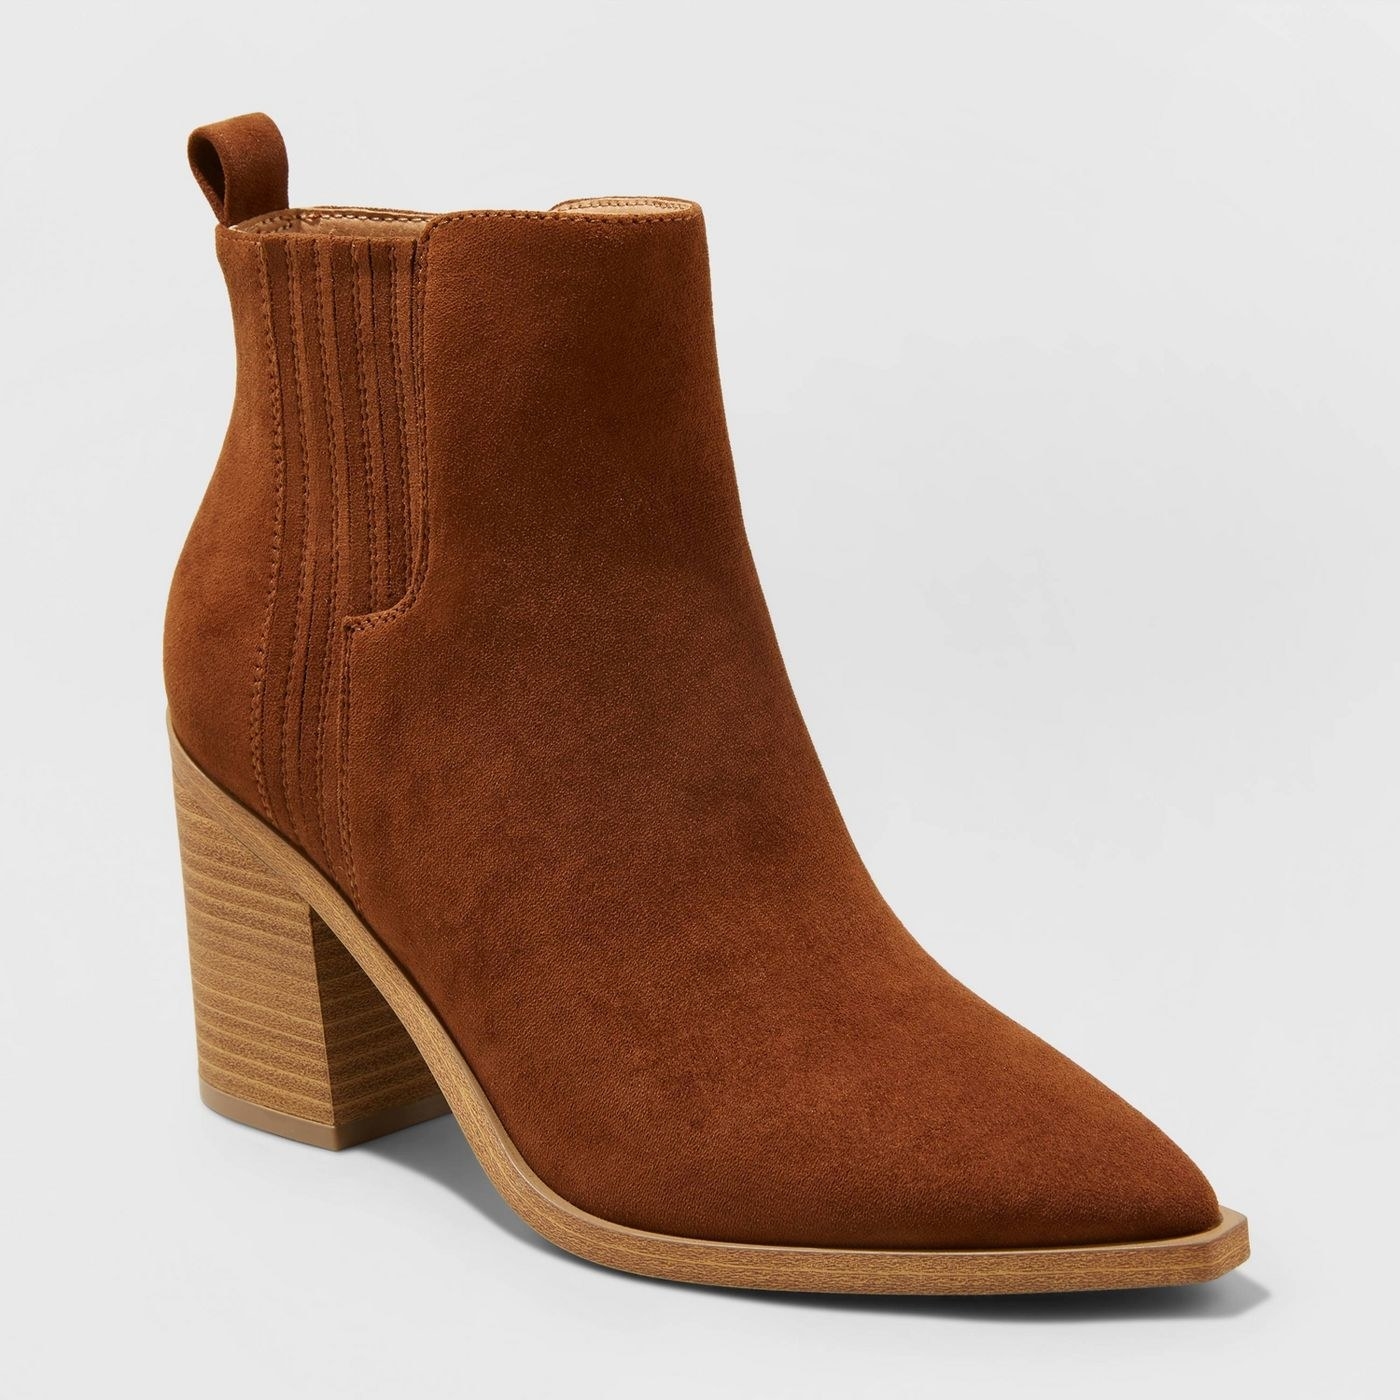 A brown heeled bootie